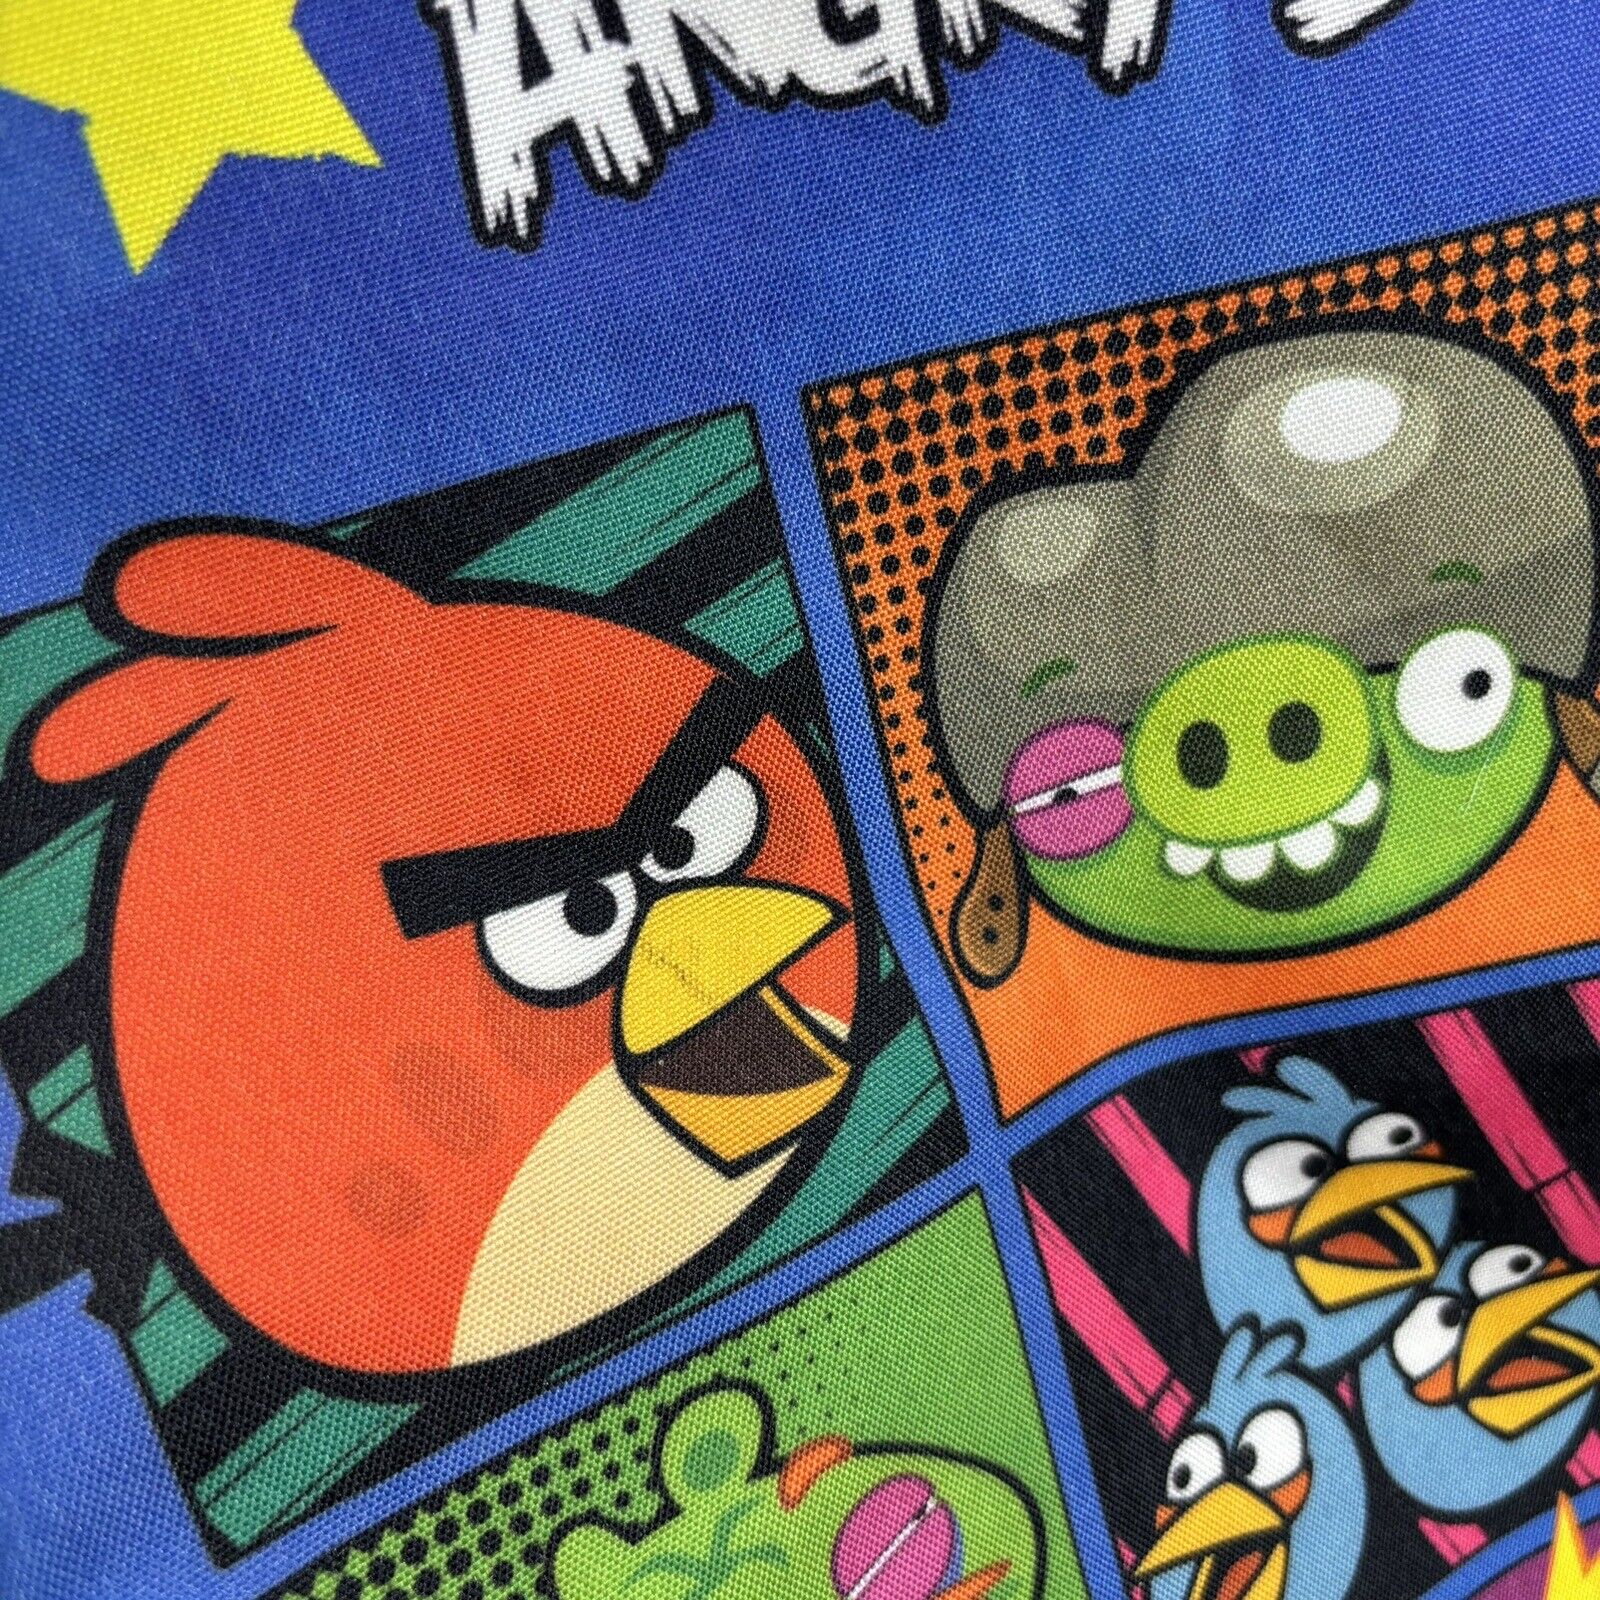 Collectible Rovio Calego 2014 Angry Birds Backpack Kids Children’s Bag